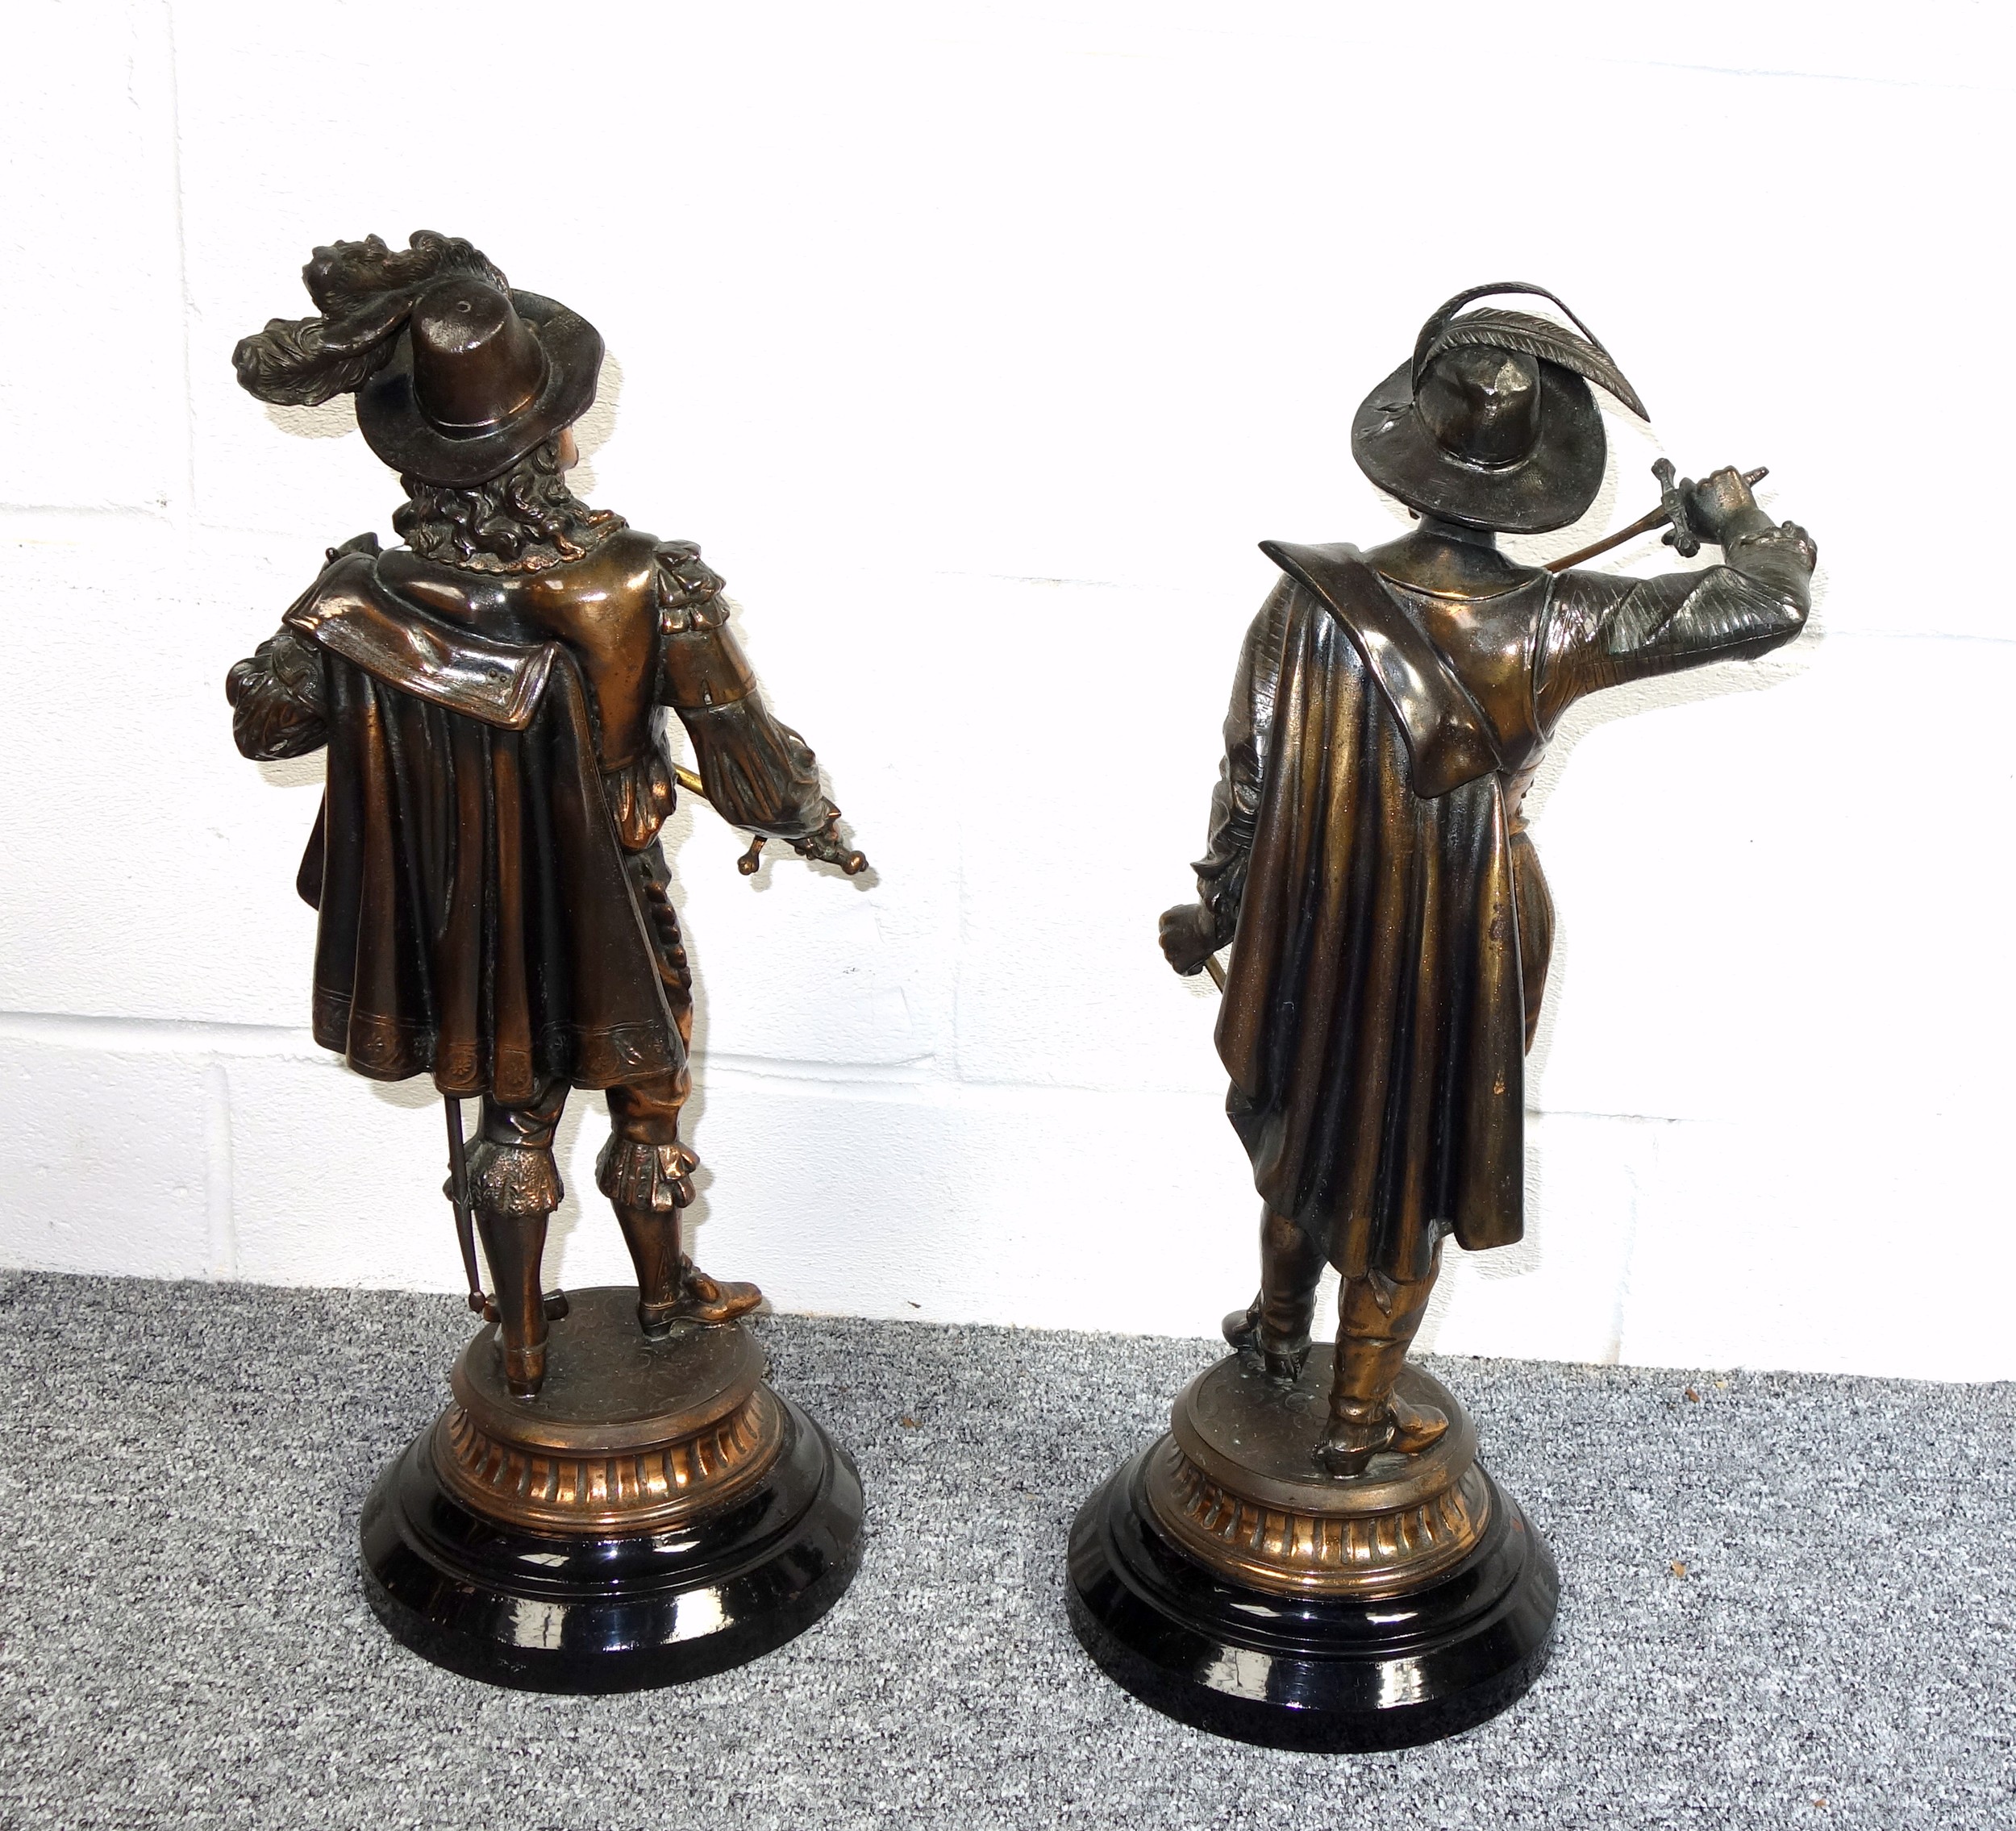 Pair of Late 19th Century French spelter figures of courtiers, each with a sword, standing on a - Image 3 of 4